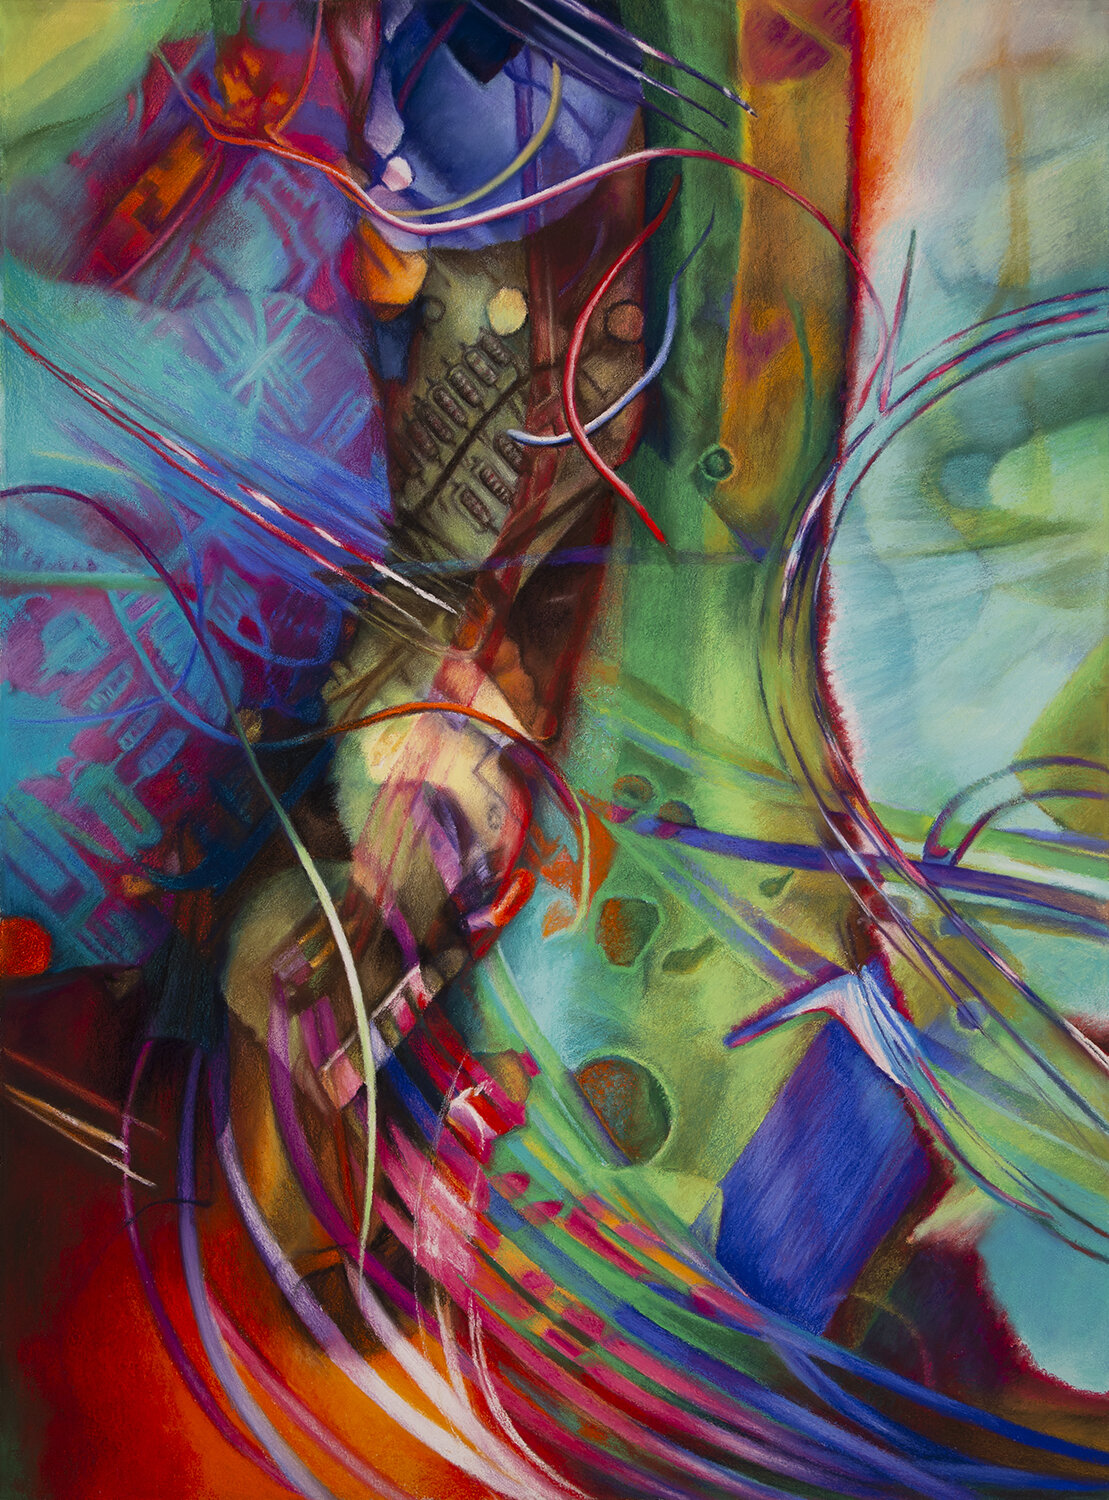 Sarah Canfield's pastel work titled "Neon".